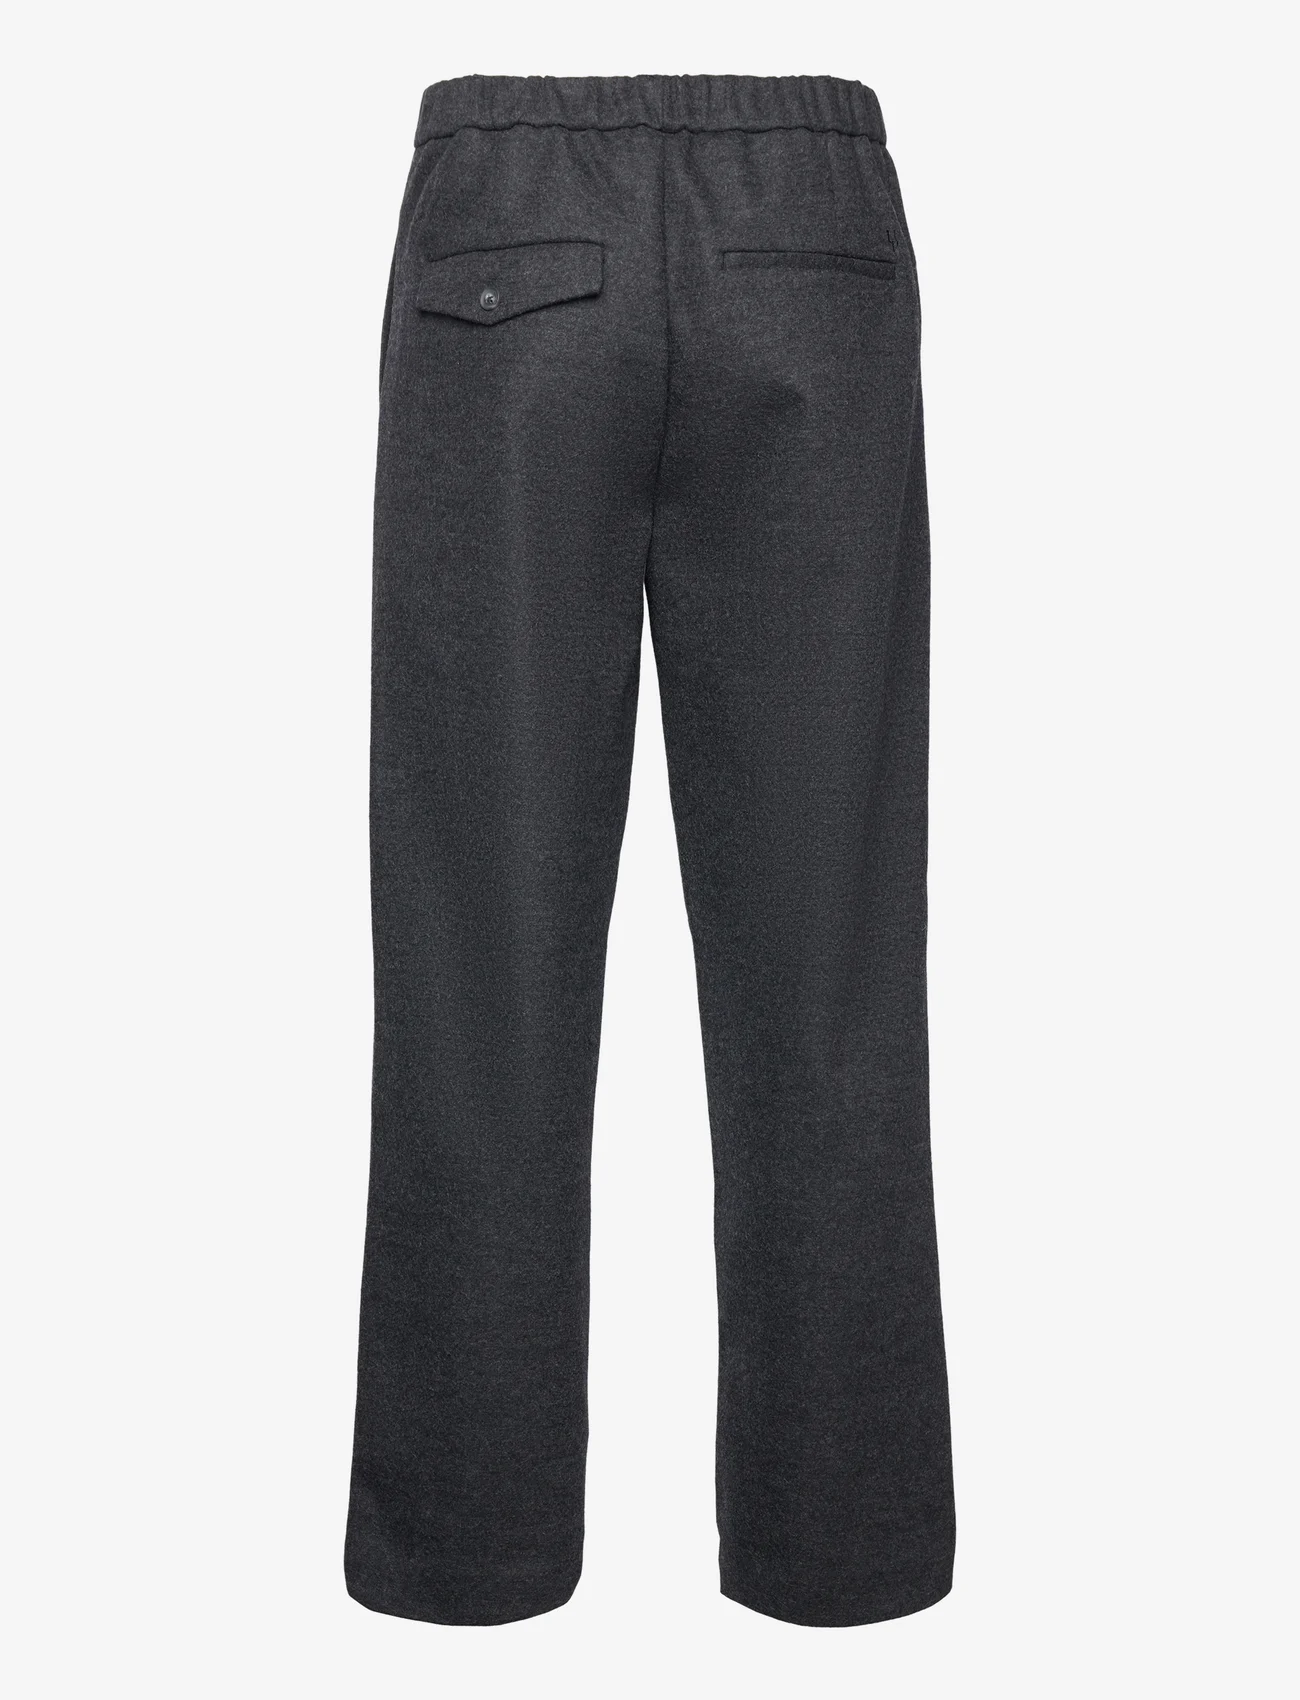 Urban Pioneers - Socrates Pants - chinot - charcoal - 1